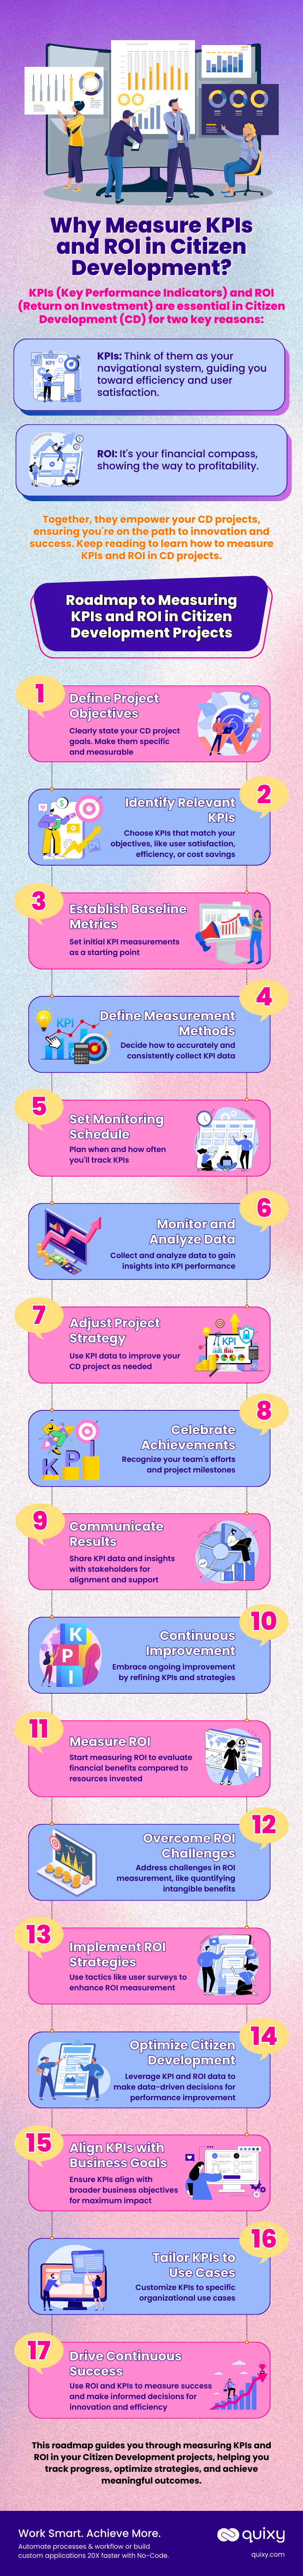 KPIs and ROI in Citizen Development infographic